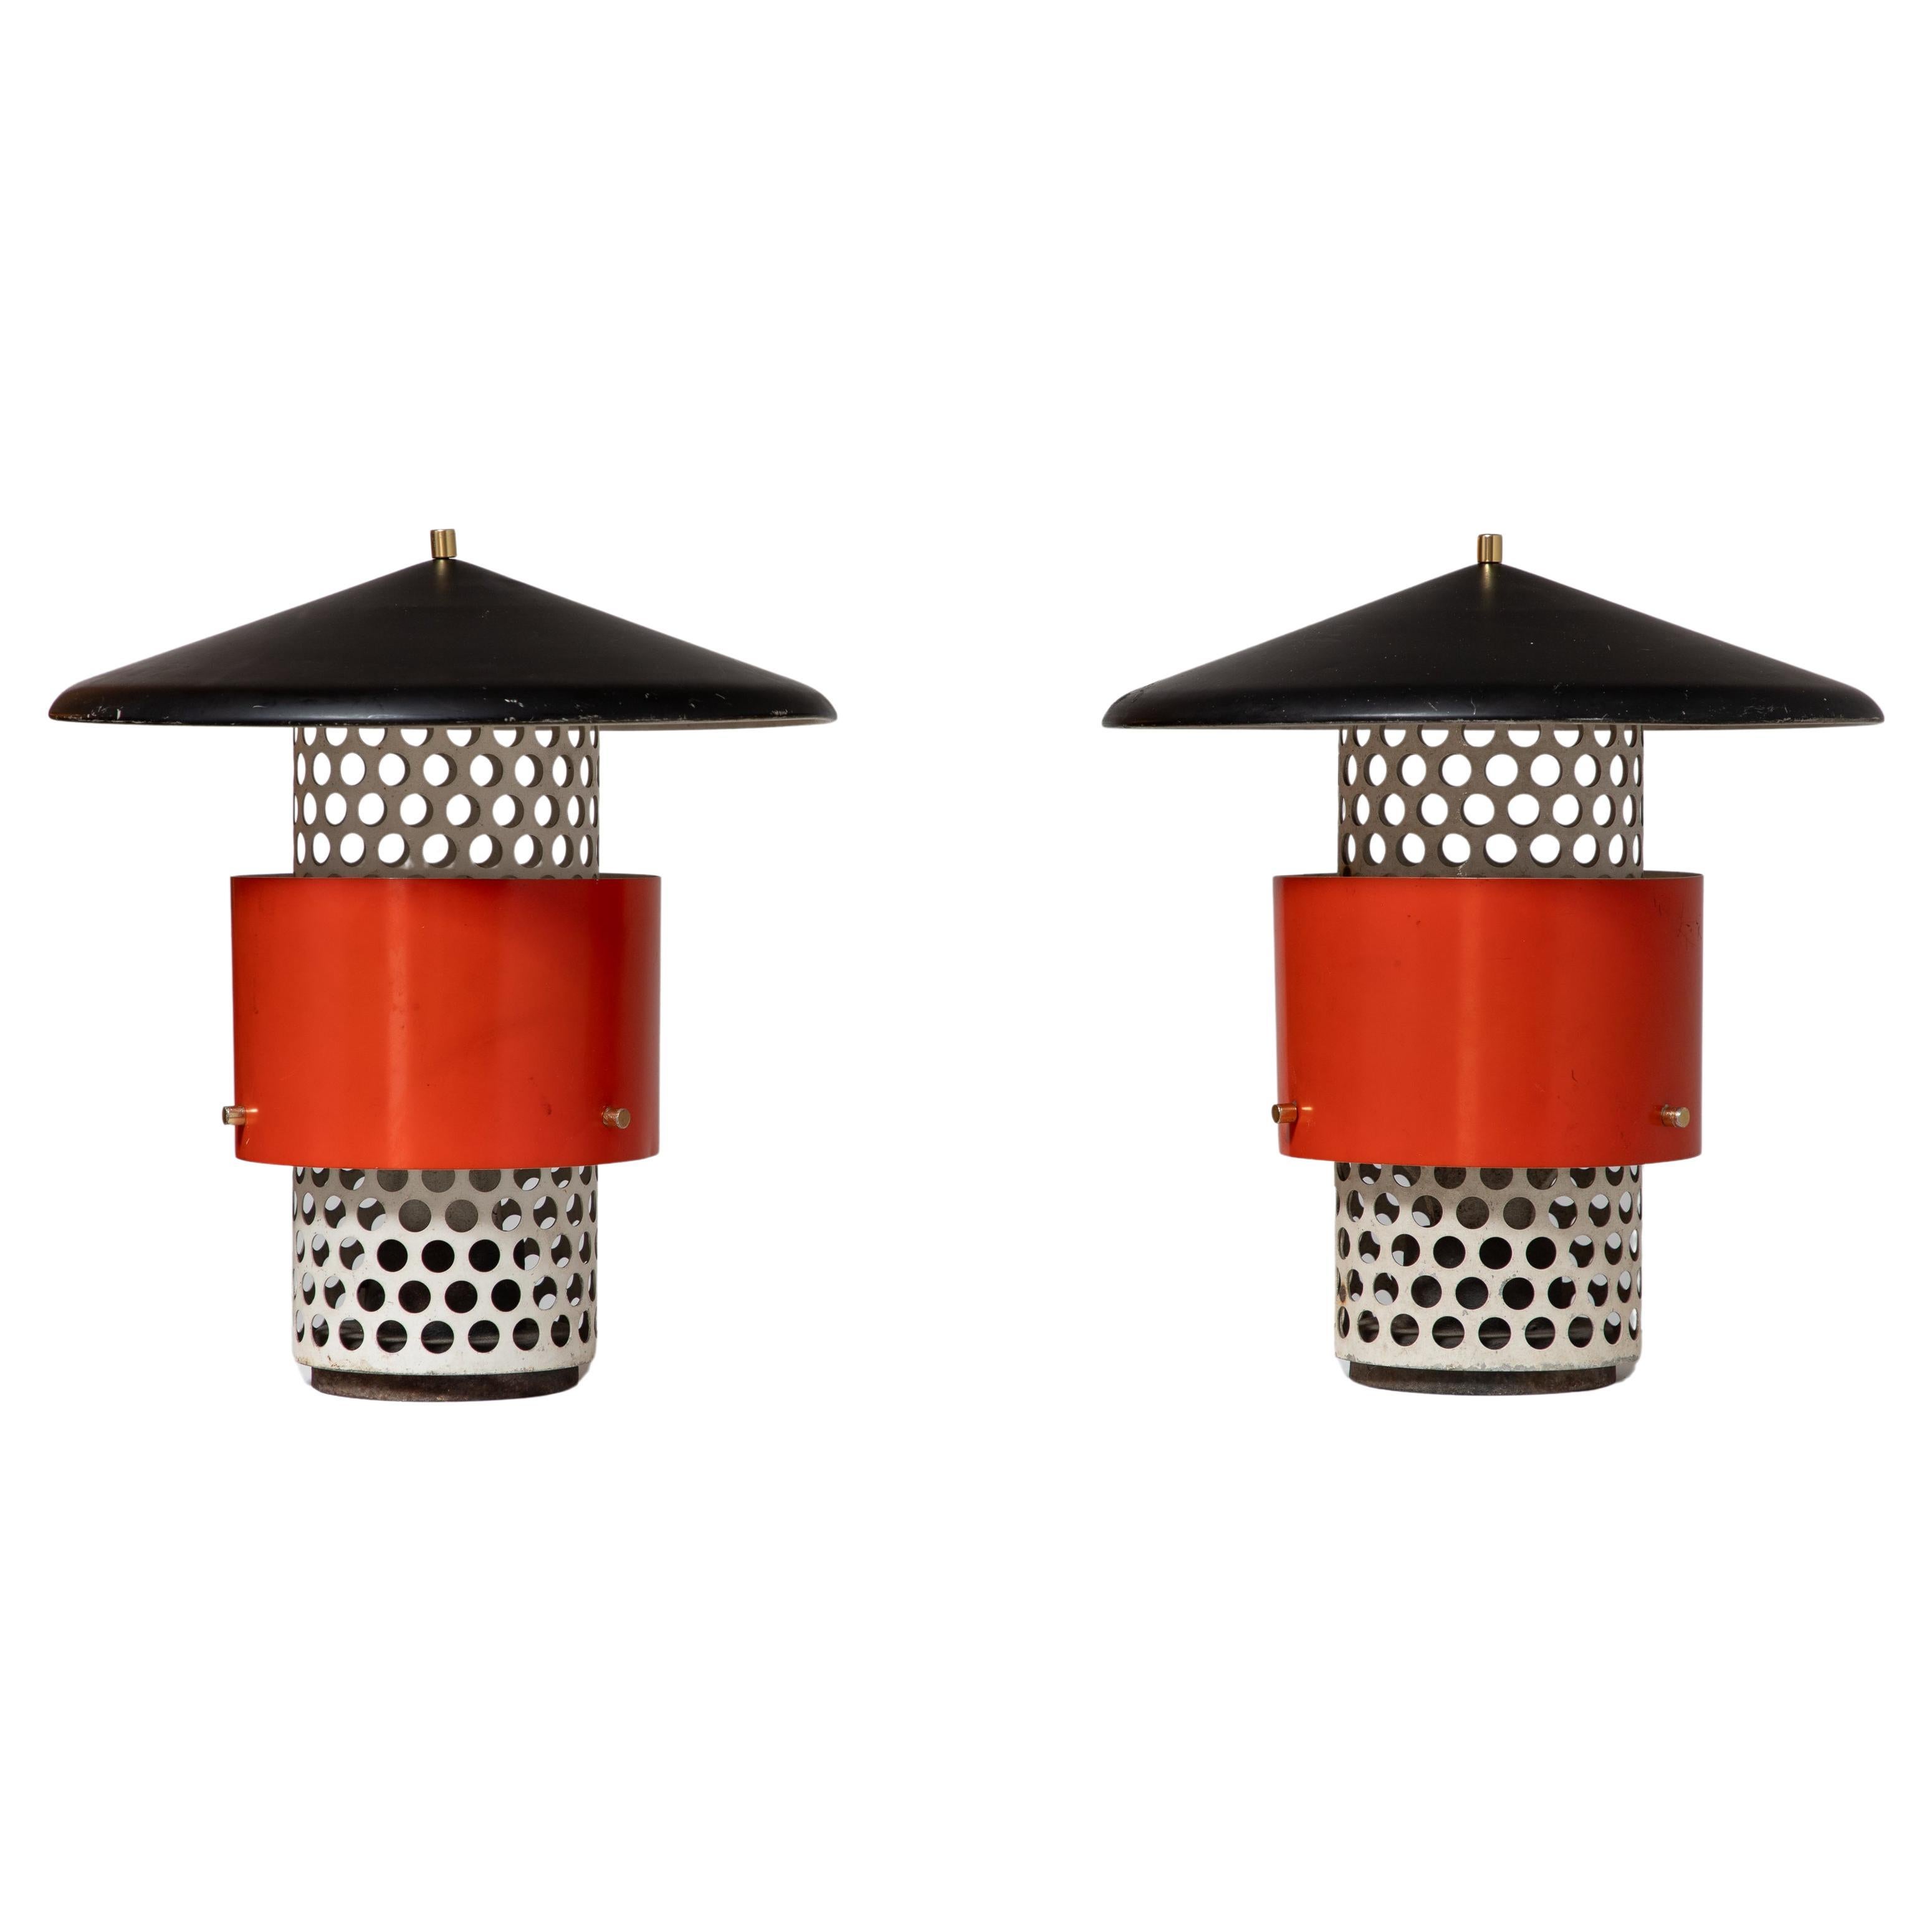 Lightolier Lytescape Perforated Metal Outdoor Lanterns or Lamps For Sale